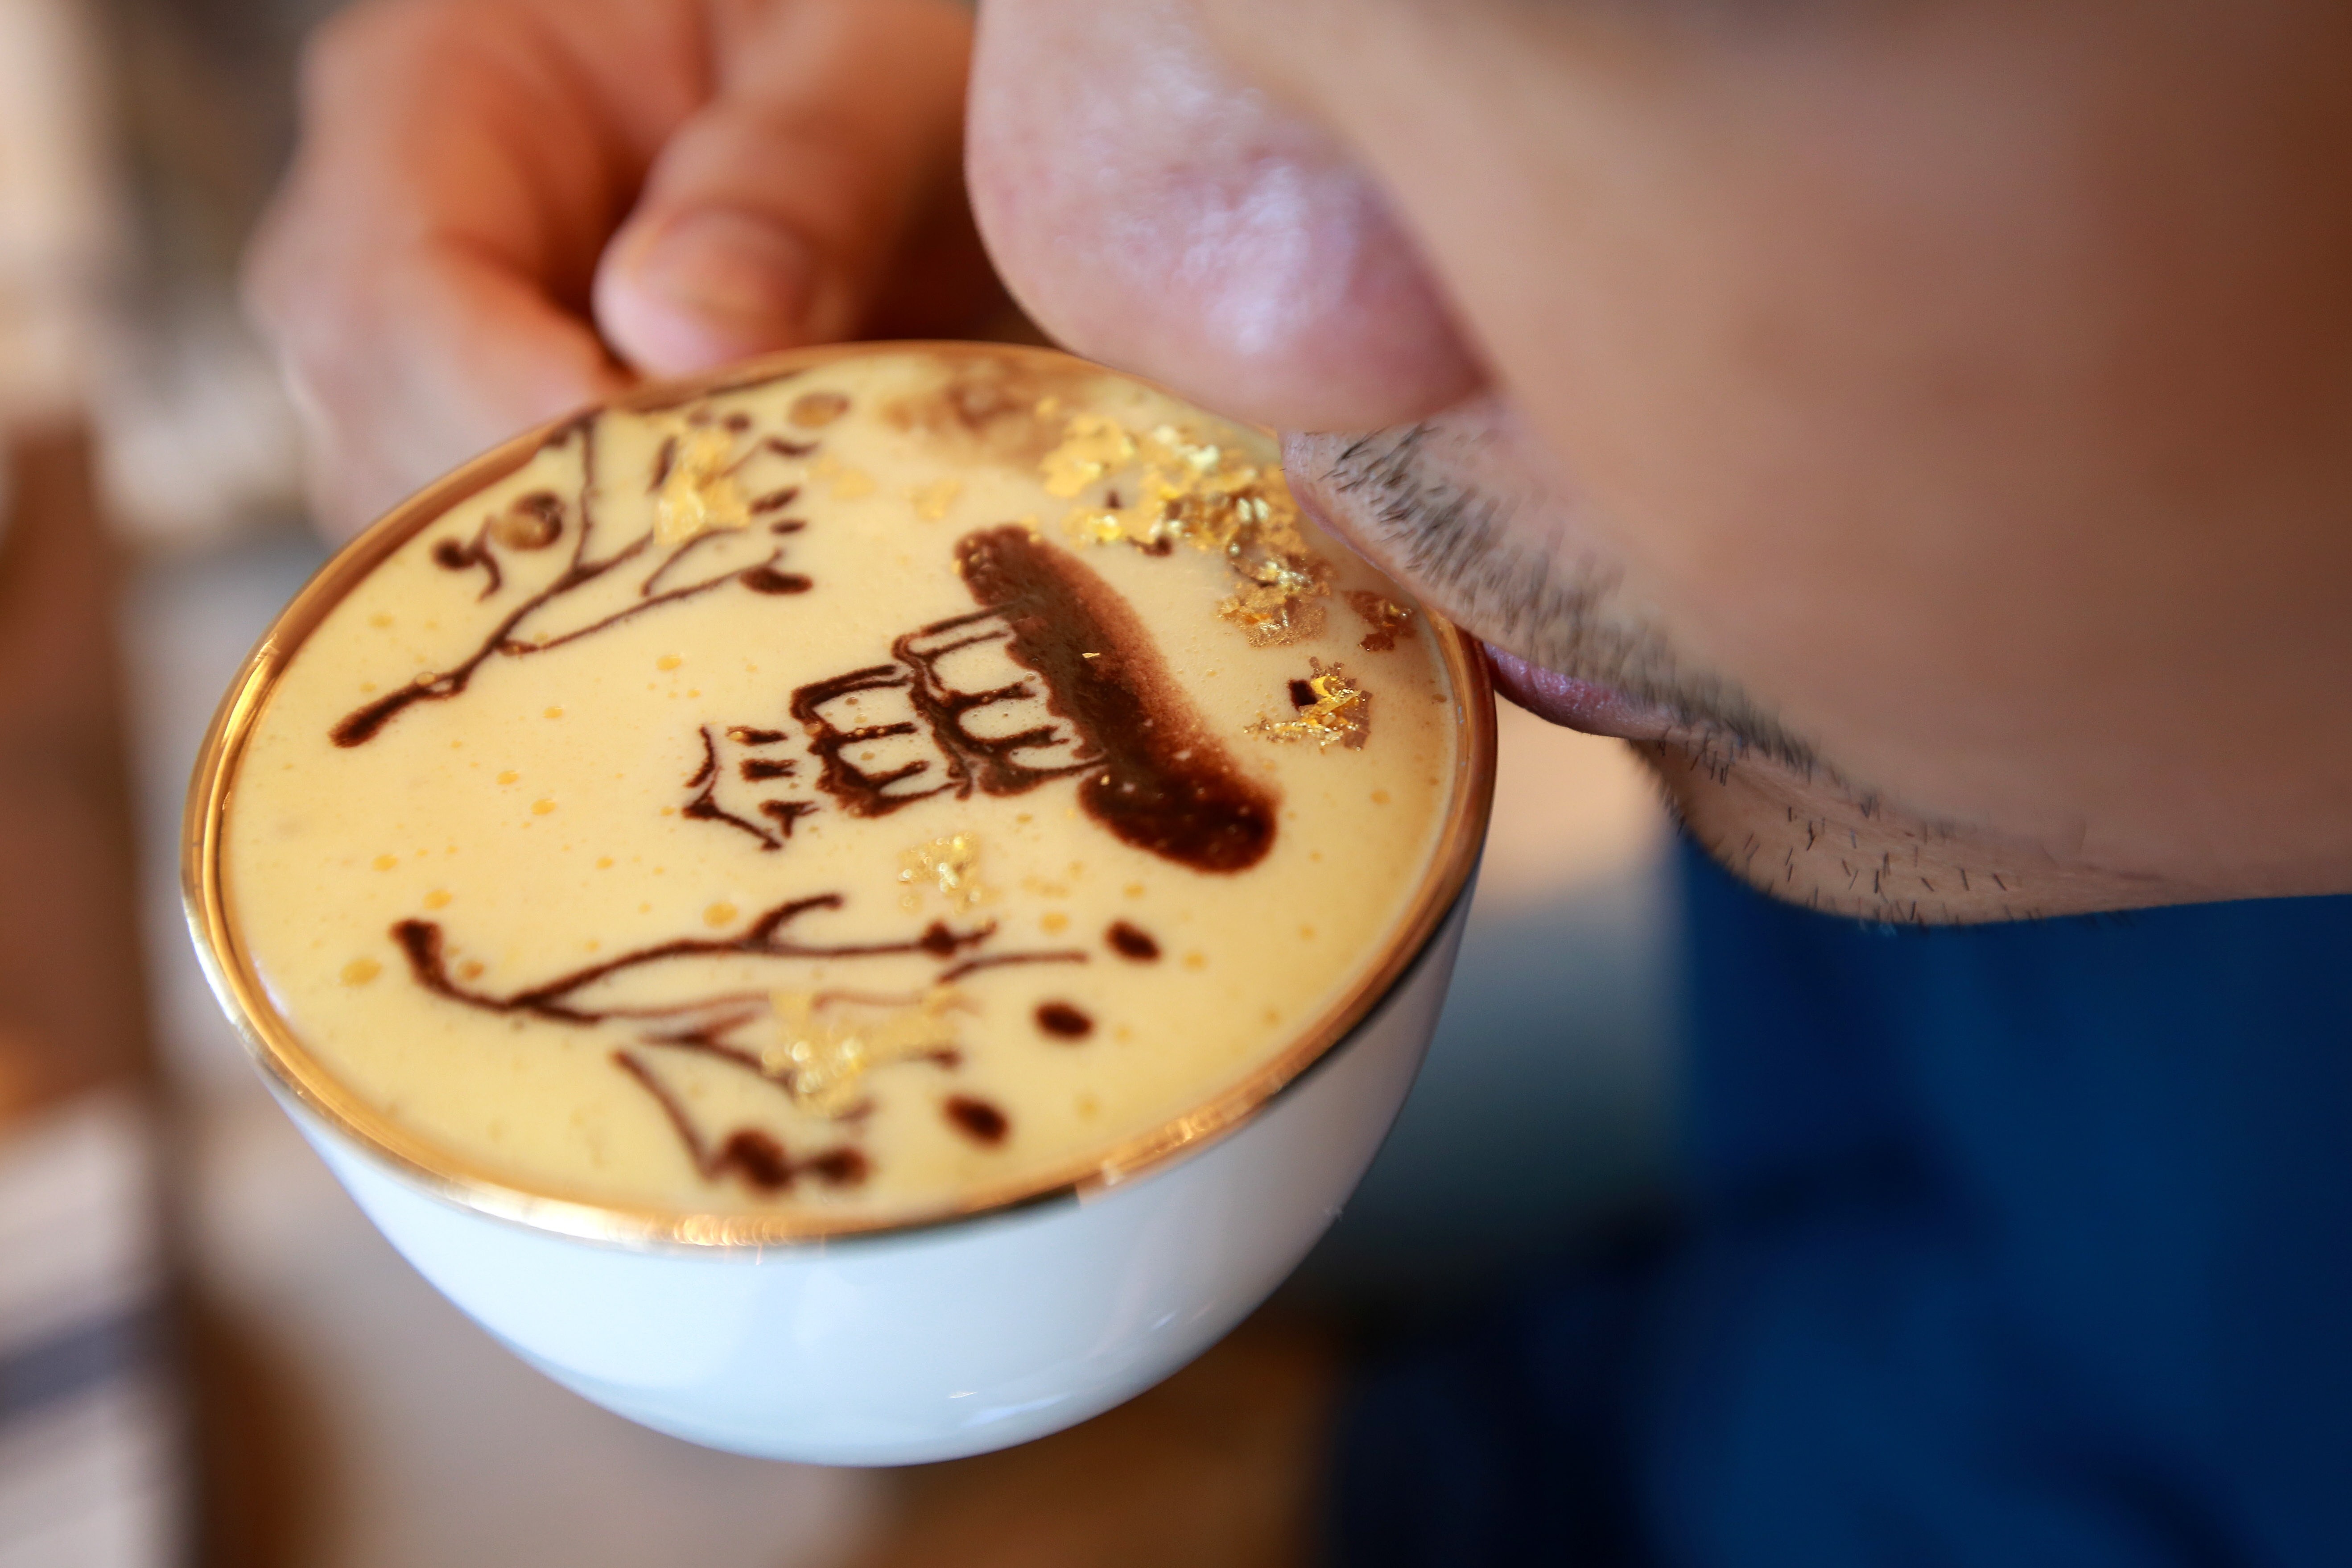 A man in Vietnam sips at a cup of so-called “Golden Egg Coffee” at the Dolce Hanoi Golden Lake hotel in Hanoi, billed as Southeast Asia’s most luxurious hotel, on July 24. Asia’s growing middle class is tomorrow’s savvy consumer. Photo: EPA-EFE